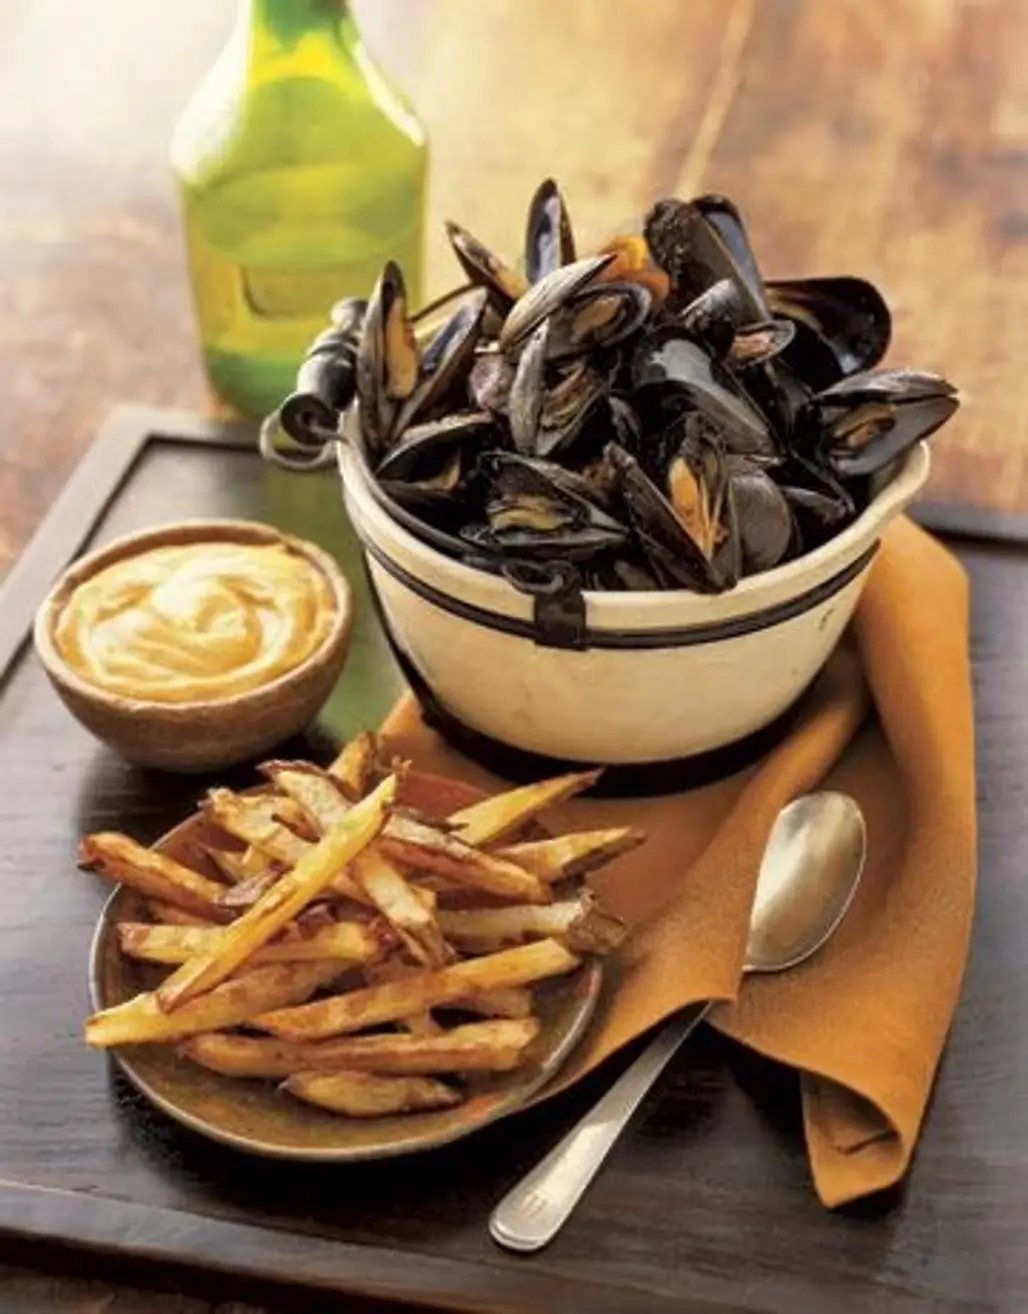 The Belgian National Dish - Moules Et Frites